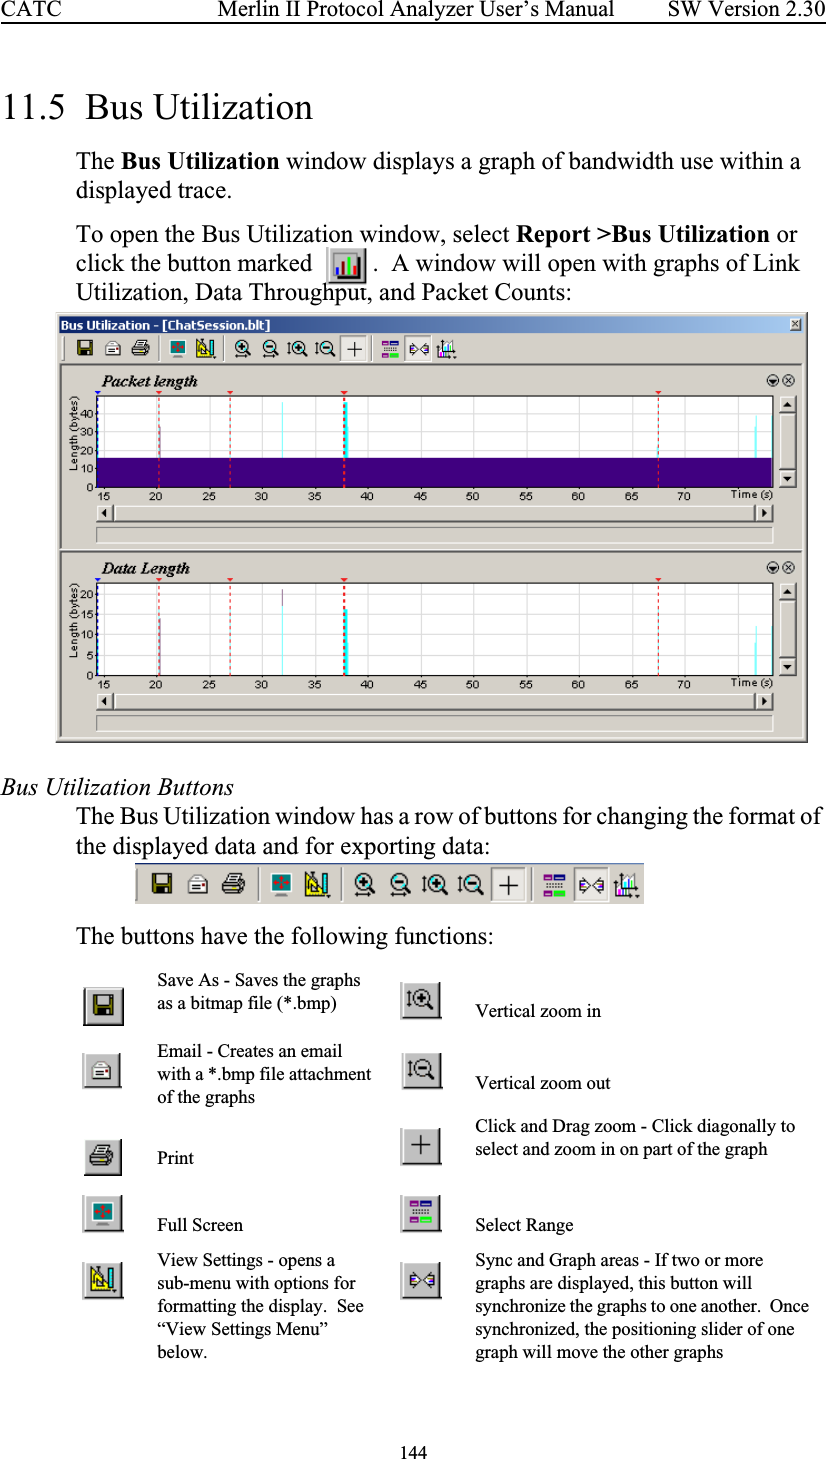 144 Merlin II Protocol Analyzer User’s ManualCATC SW Version 2.3011.5  Bus UtilizationThe Bus Utilization window displays a graph of bandwidth use within a displayed trace.  To open the Bus Utilization window, select Report &gt;Bus Utilization or click the button marked   .  A window will open with graphs of Link Utilization, Data Throughput, and Packet Counts:Bus Utilization ButtonsThe Bus Utilization window has a row of buttons for changing the format of the displayed data and for exporting data:The buttons have the following functions:Save As - Saves the graphs as a bitmap file (*.bmp) Vertical zoom inEmail - Creates an email with a *.bmp file attachment of the graphs Vertical zoom outPrintClick and Drag zoom - Click diagonally to select and zoom in on part of the graphFull Screen Select RangeView Settings - opens a sub-menu with options for formatting the display.  See “View Settings Menu” below.Sync and Graph areas - If two or more graphs are displayed, this button will synchronize the graphs to one another.  Once synchronized, the positioning slider of one graph will move the other graphs